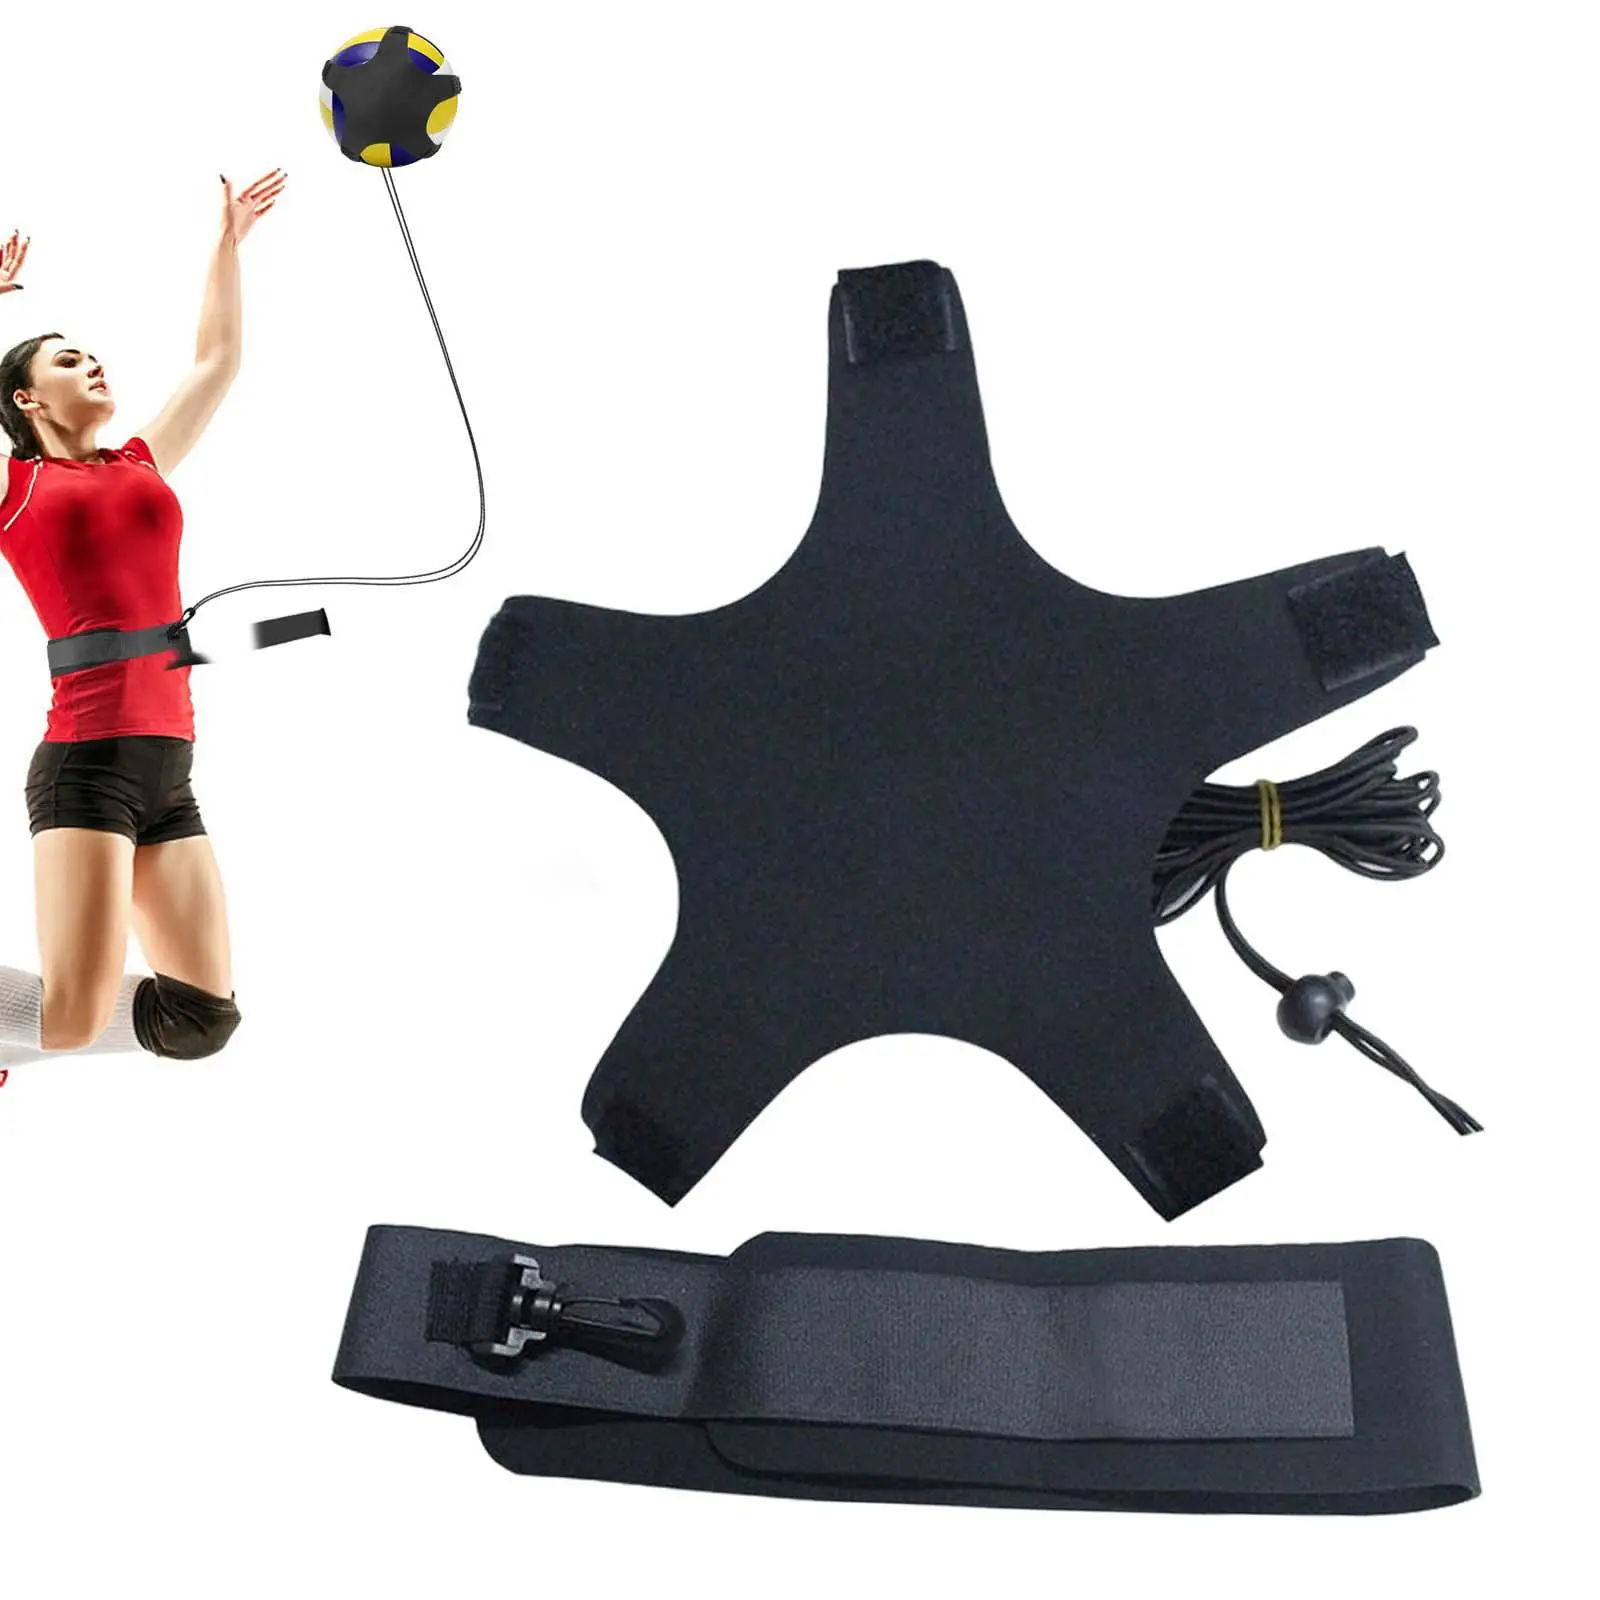 Volleyball Training Equipment Aid for Teen Girls & Boys Serving Setting